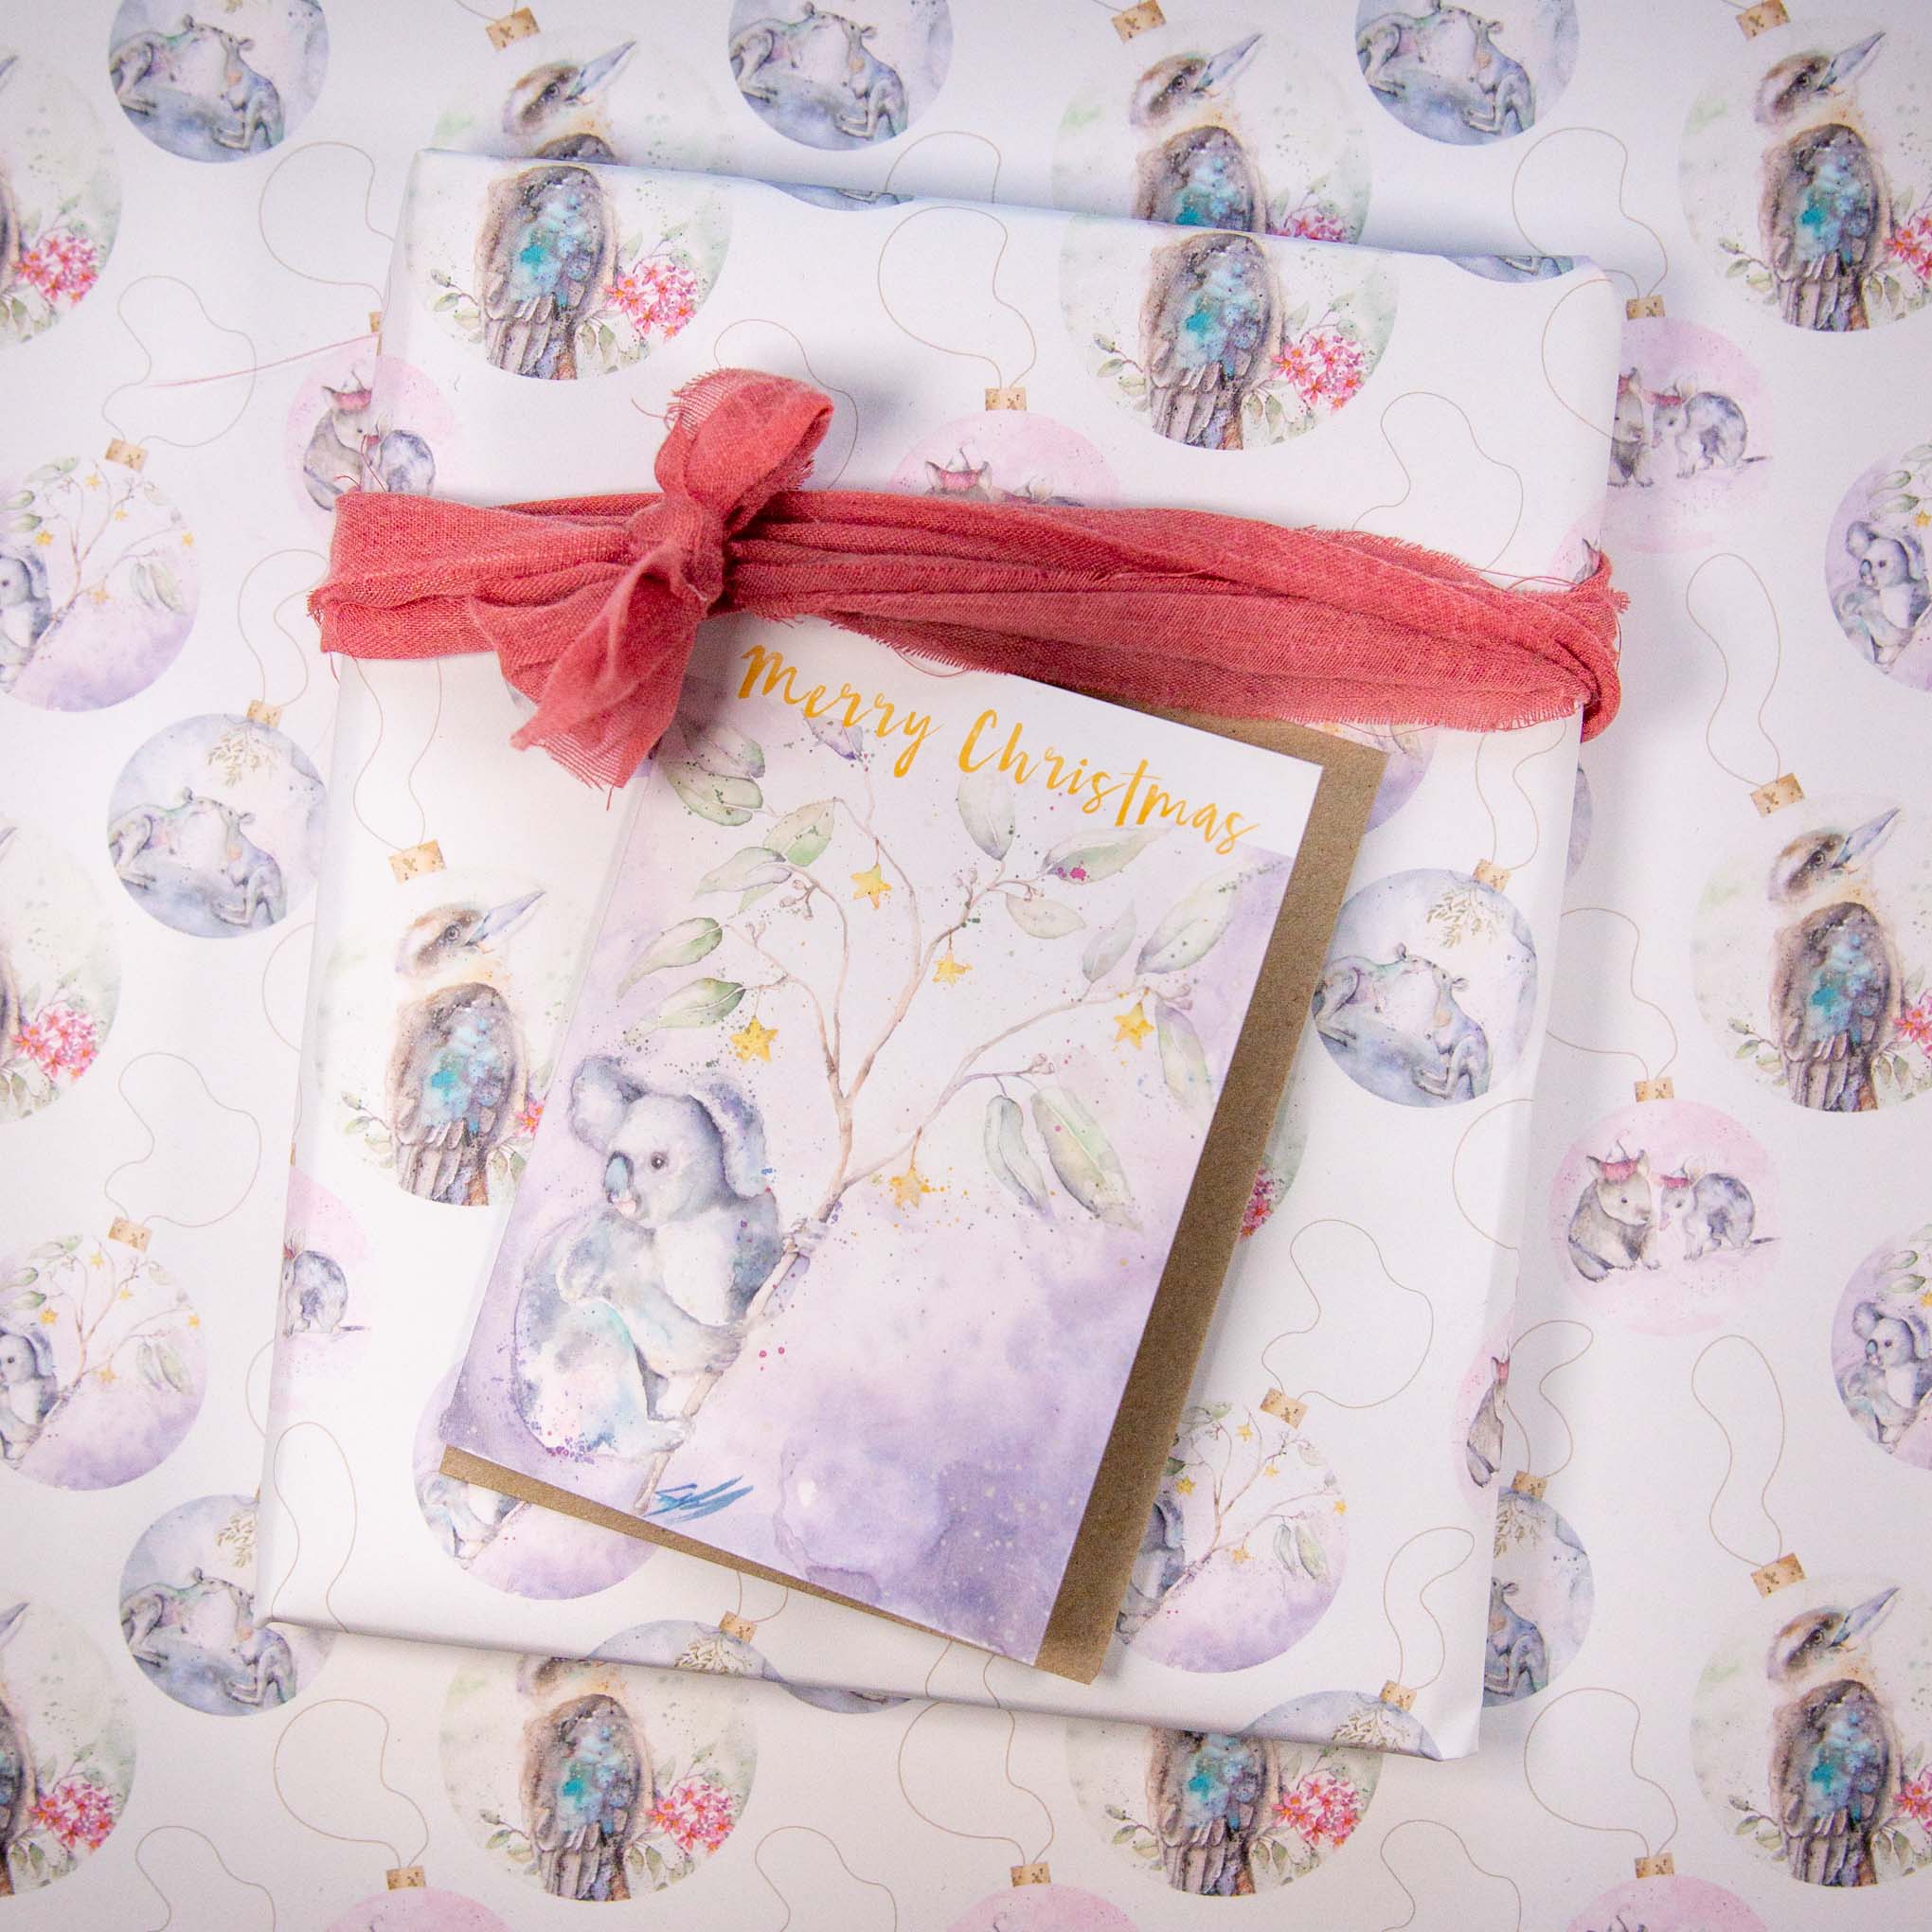 Koala greeting card and christmas wrapping paper